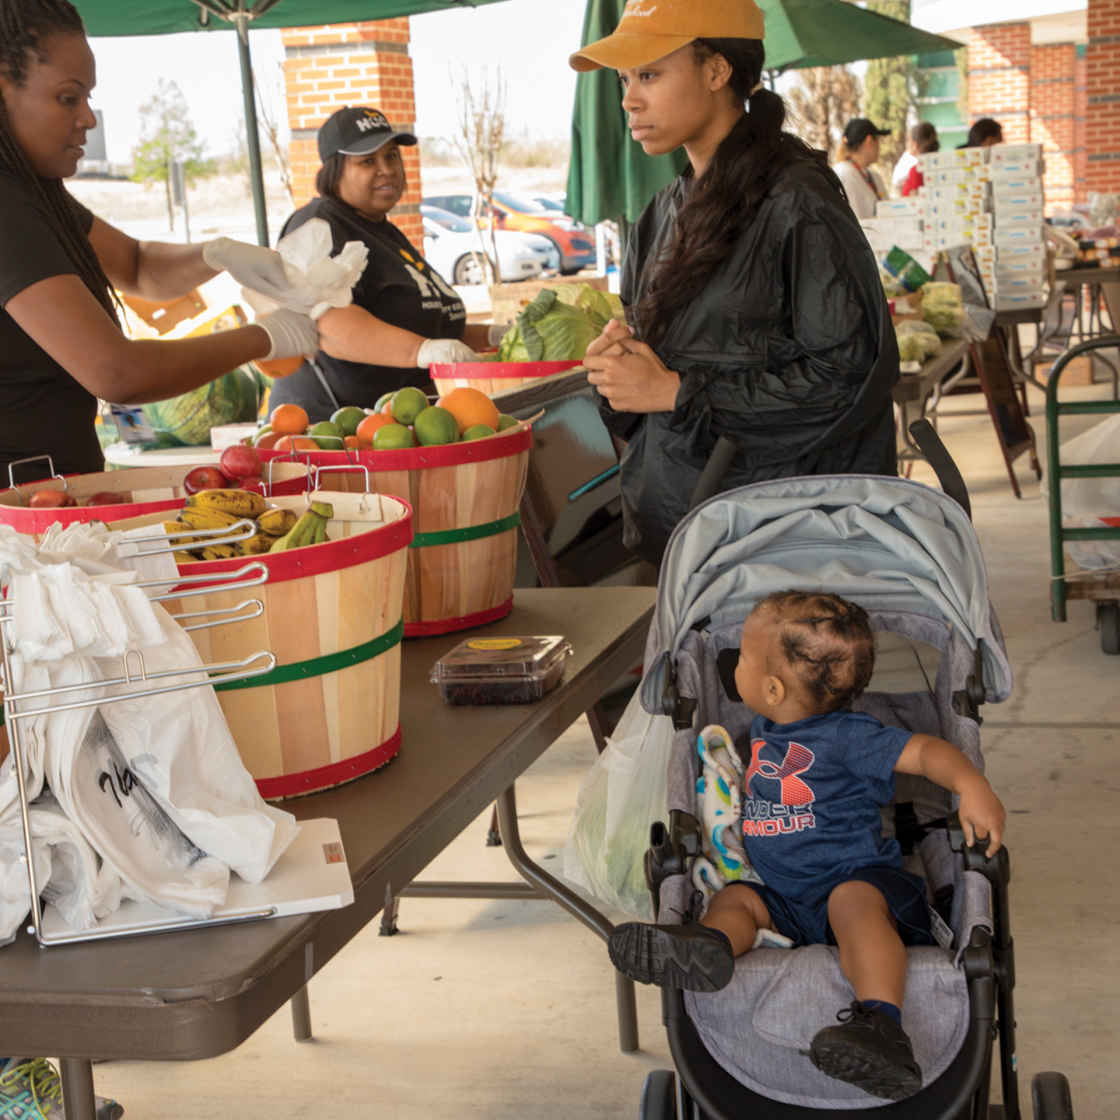 The Family Independence Initiative in Oakland, California, aims to change the way investment is made in low-income communities and families.